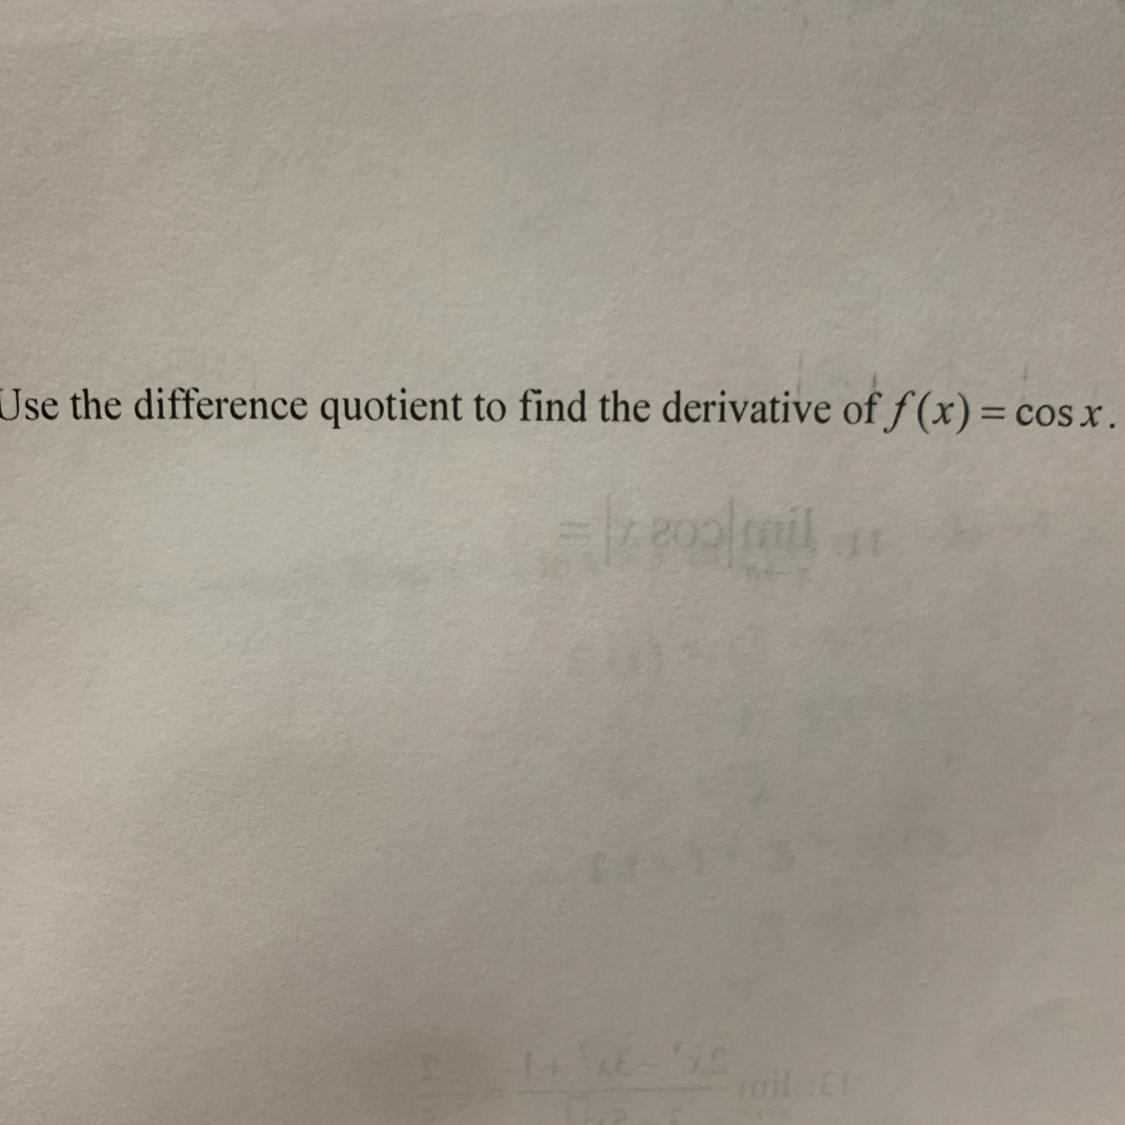 Math Help Pls! Im Not Sure How To Solve This